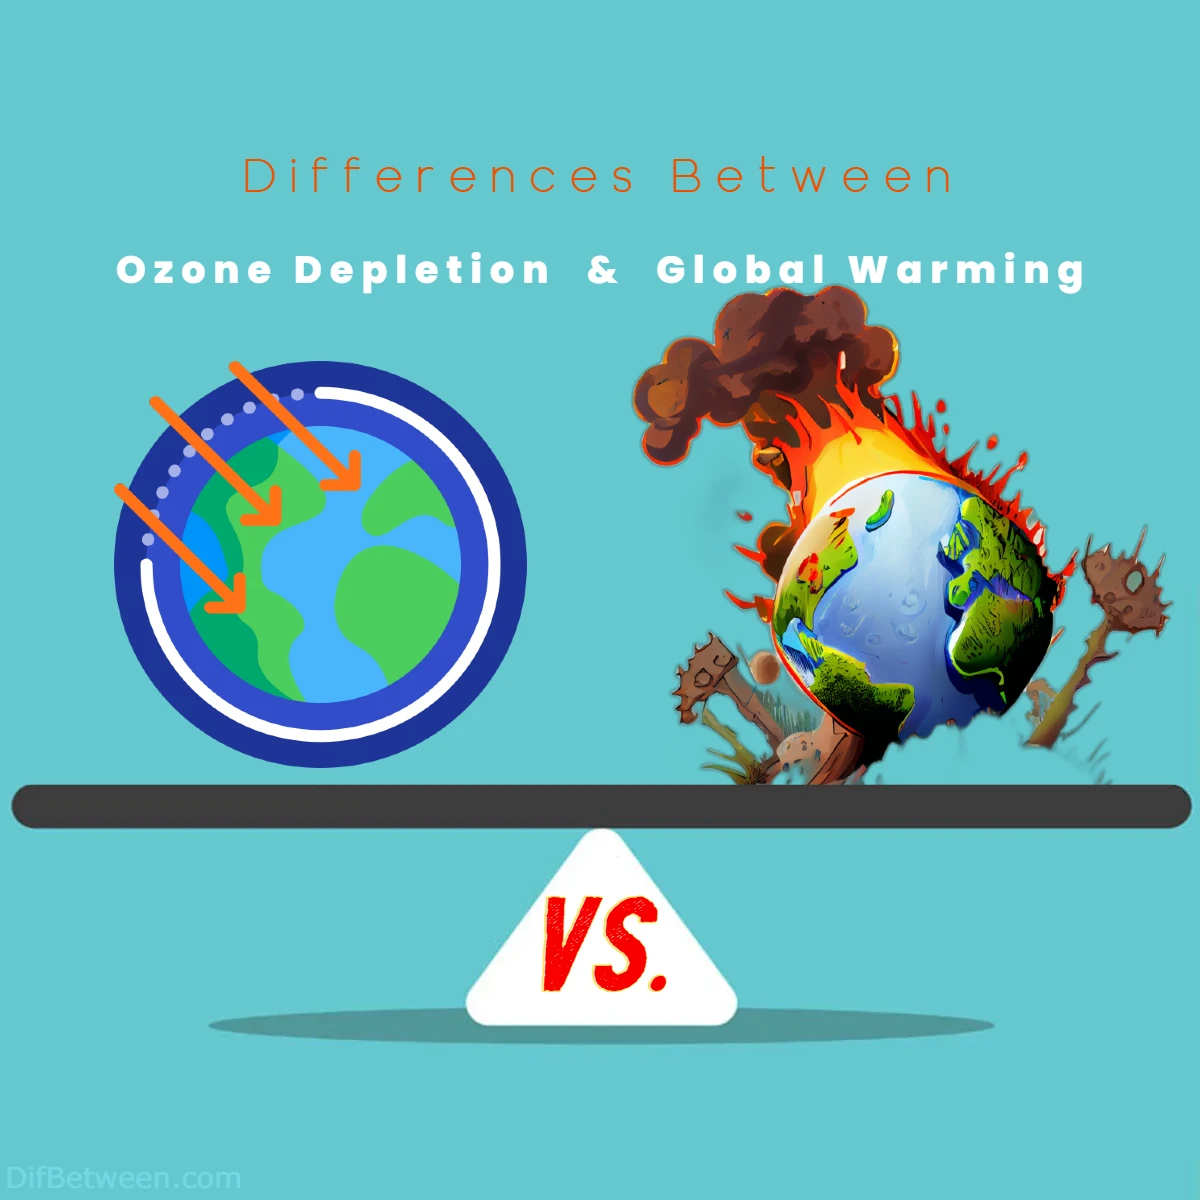 Differences Between Ozone Depletion vs Global Warming